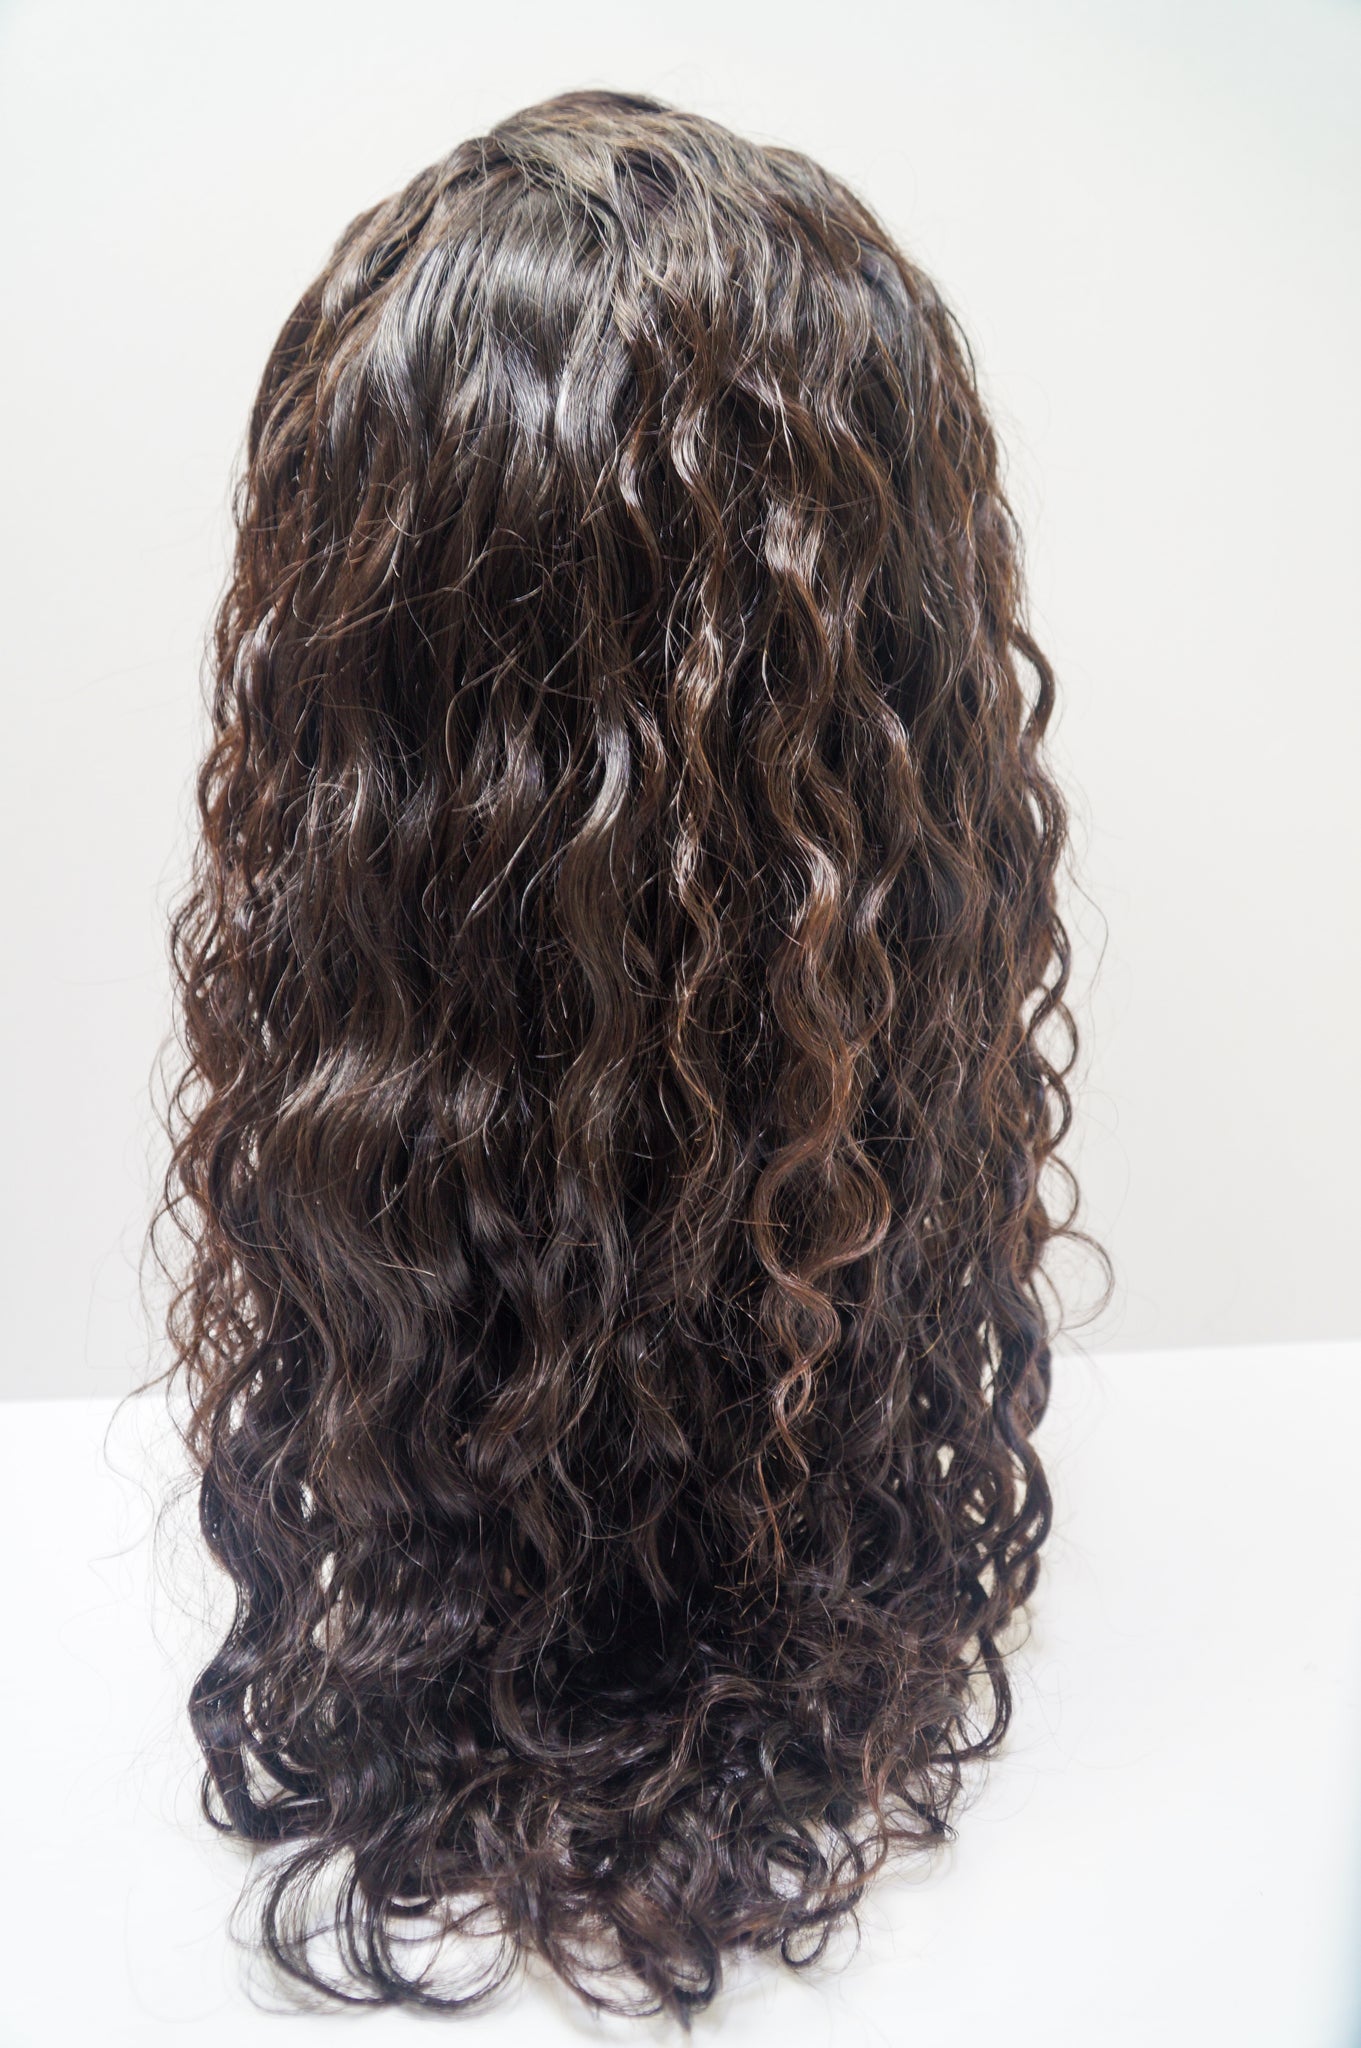 Virgin Cuticle Spanish Curly - Lace Front Wig